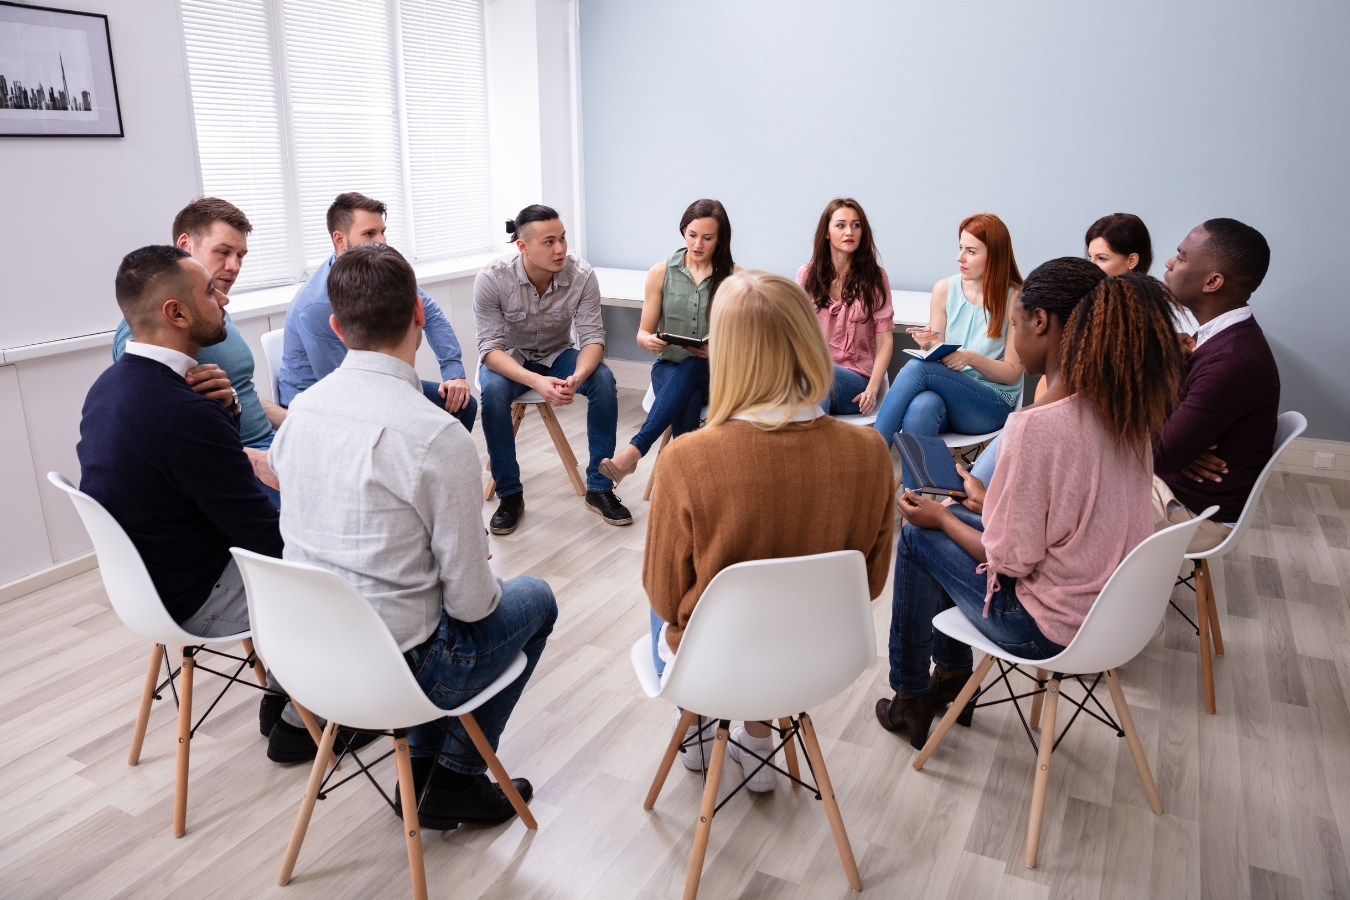 A social worker holds a group counselling session to multiple adults who are sitting in a circle on chairs. Sparkrock's ERP features can help free up time for practitioners to focus on what they do best - help their patients.